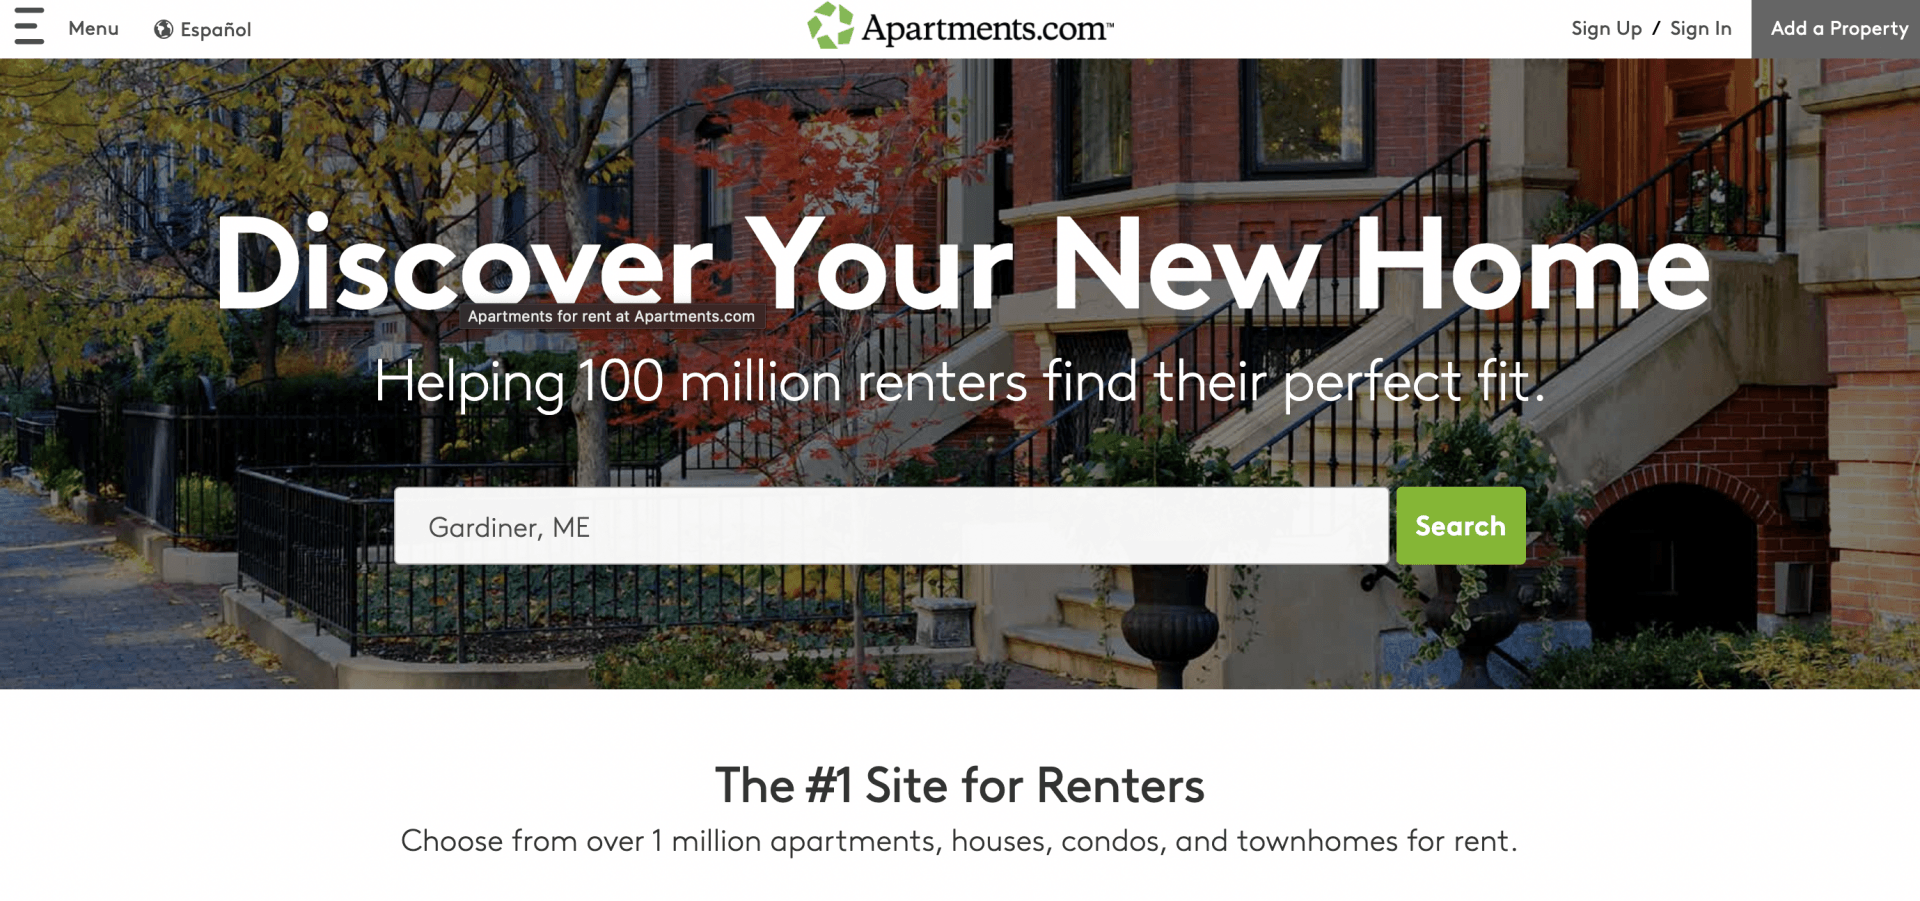 The Best Websites To Help You Find The Perfect Apartment - Apartments.com